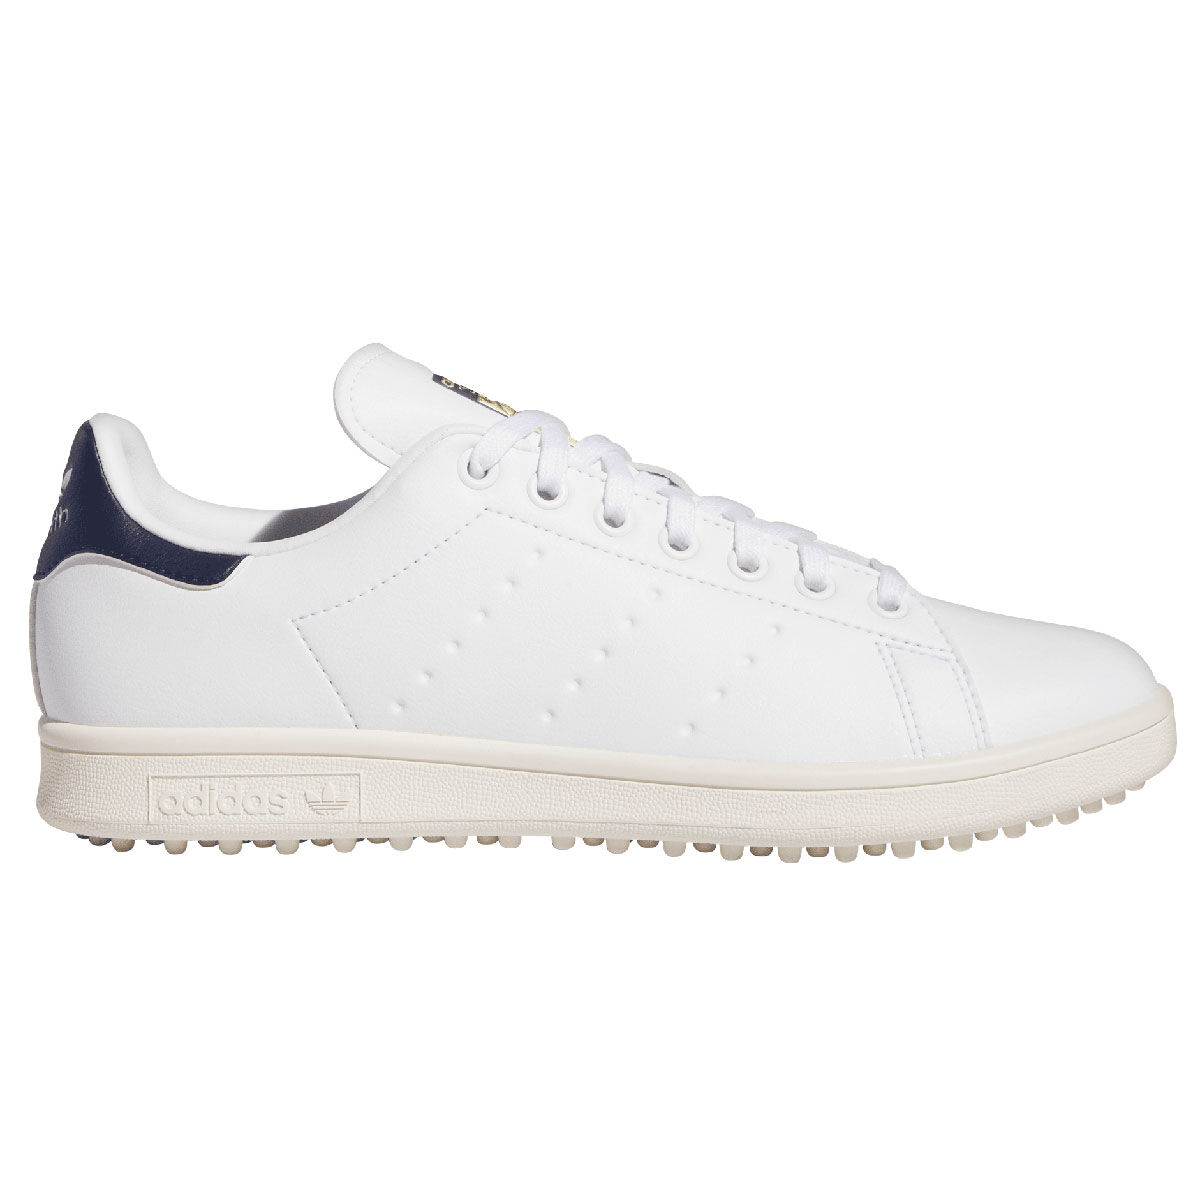 adidas Men’s Stan Smith Waterproof Spikeless Golf Shoes, Mens, White/wonder blue/off white, 8 | American Golf